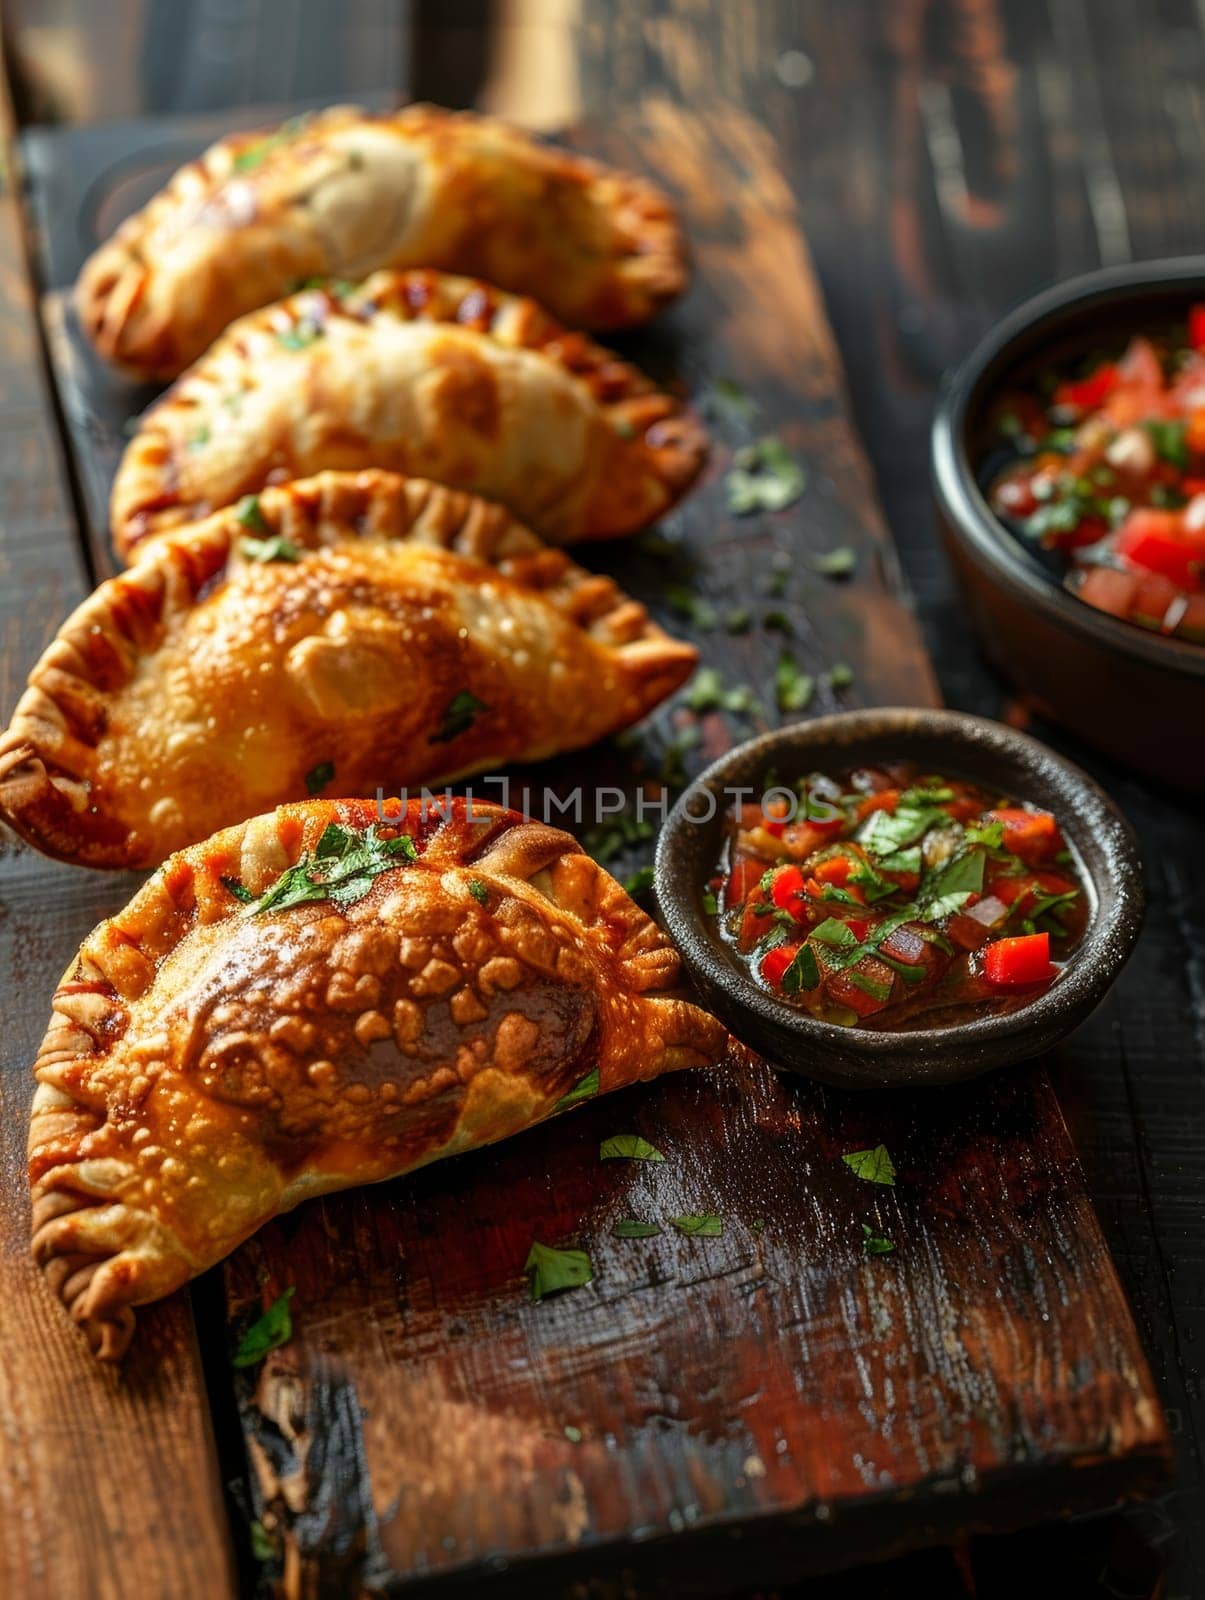 Freshly baked Chilean empanadas, savory pastries filled with a delectable mixture, served alongside a vibrant pebre sauce on a rustic wooden board. This traditional pairing showcases Chilean cuisine. by sfinks